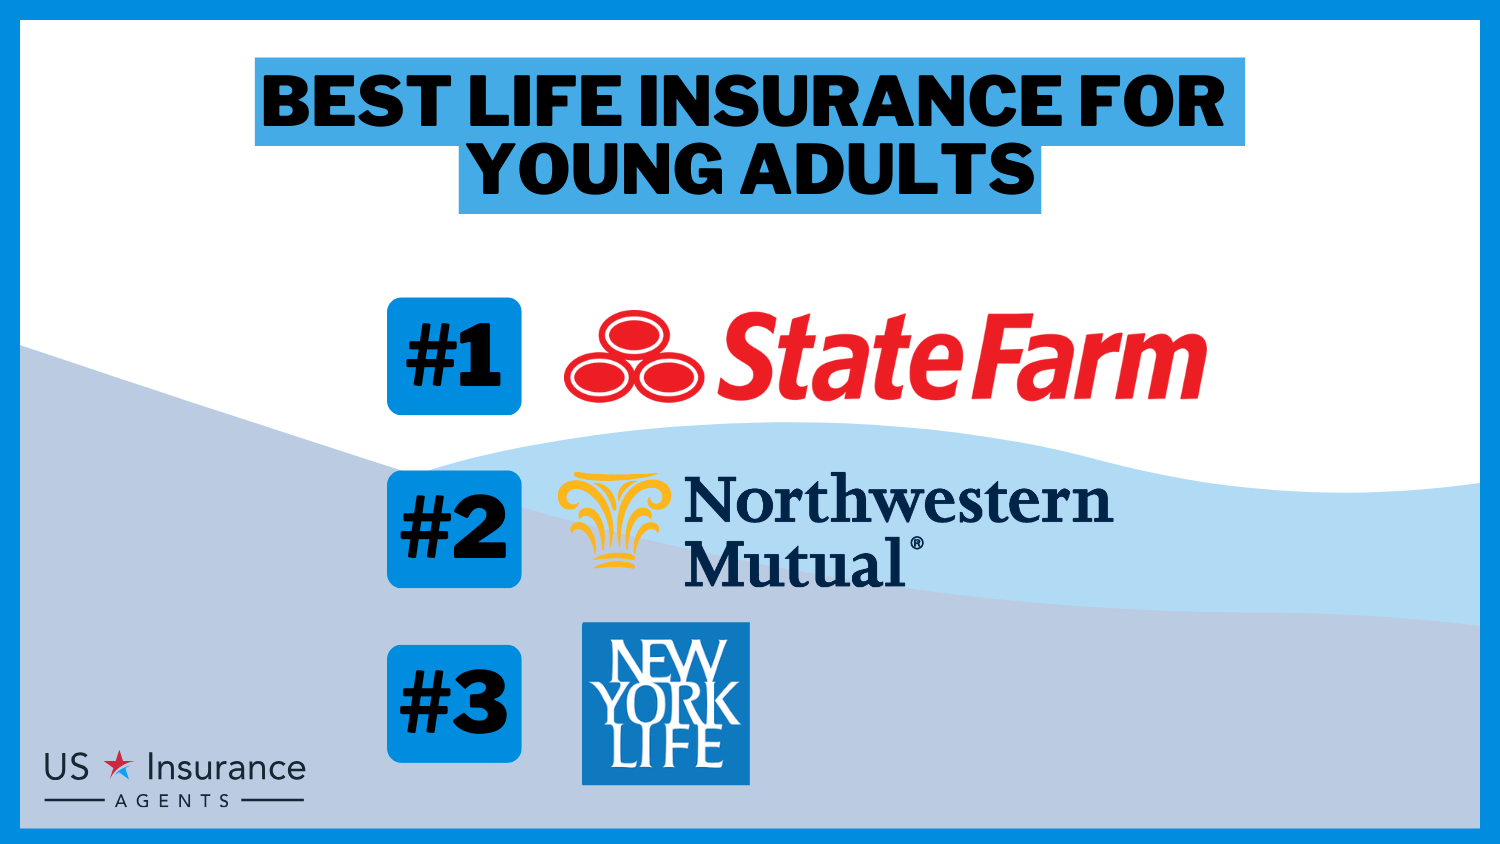 Best Life Insurance for Young Adults: State Farm, Northwestern Mutual, and New York Life.